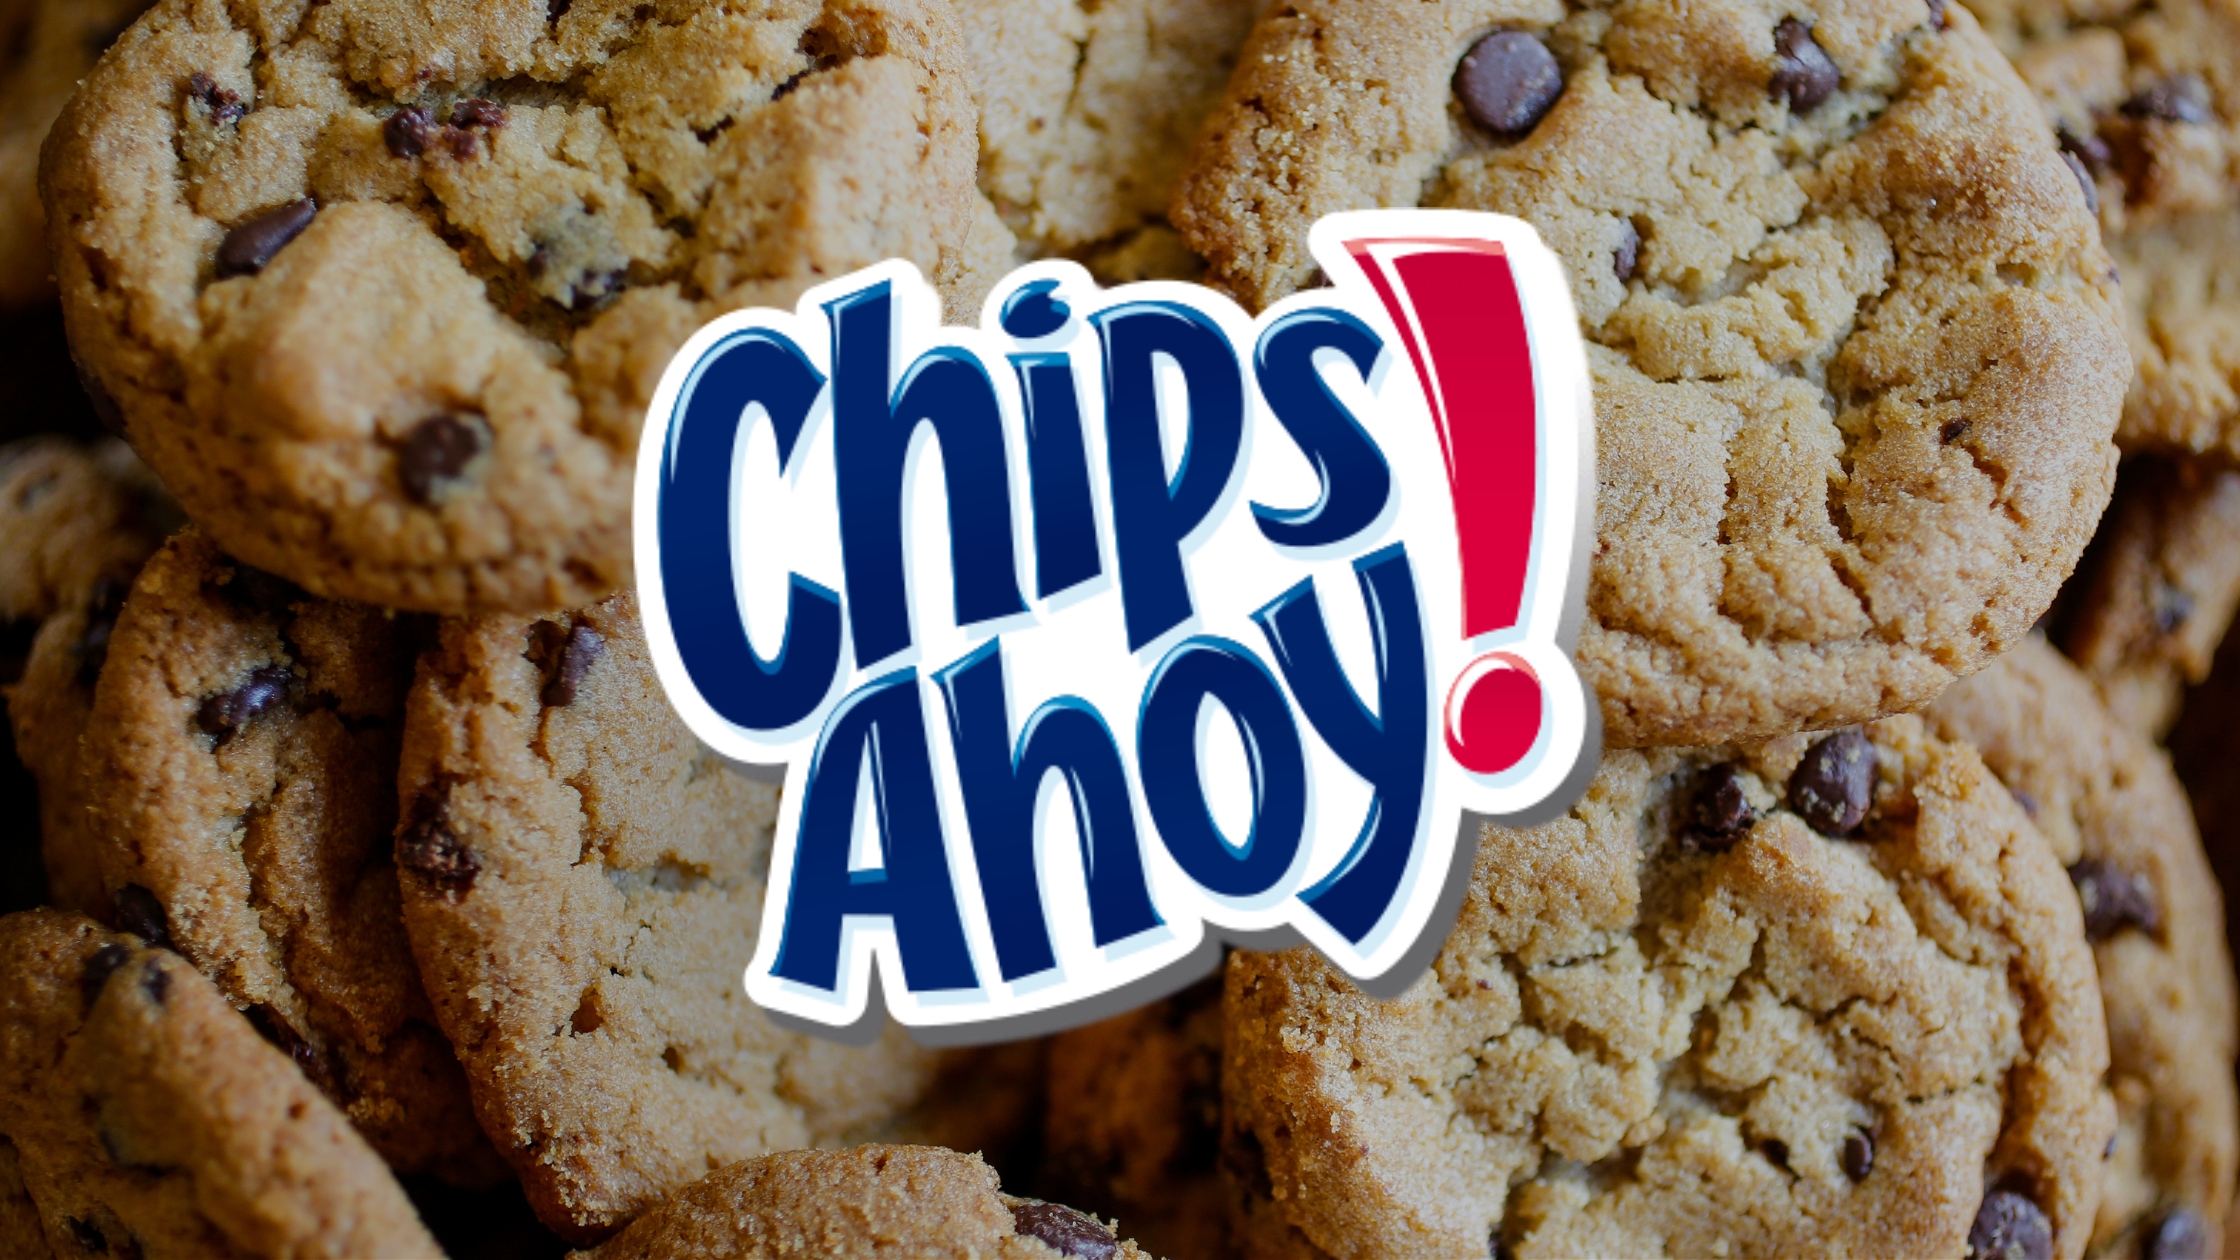 The History of Chips Ahoy Cookies